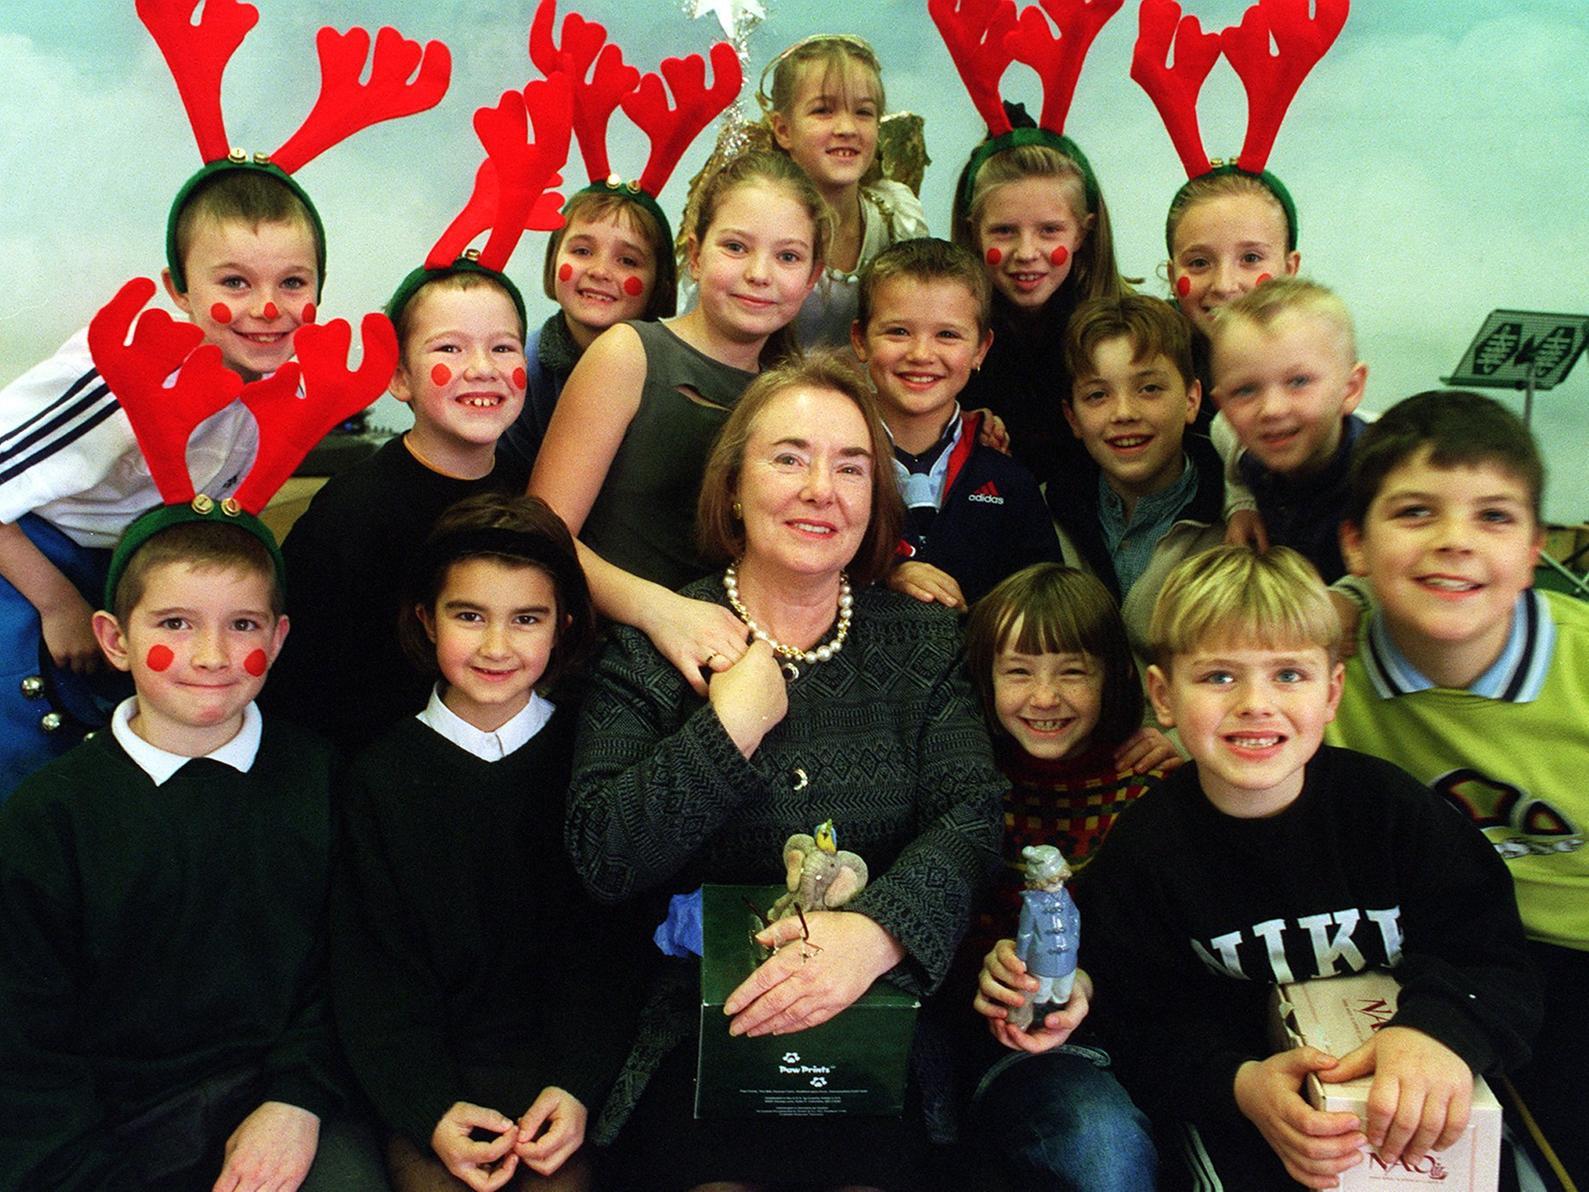 Eileen Dixon, headteacher at Beechwood Primary in Seacroft for 13 years, was retiring.